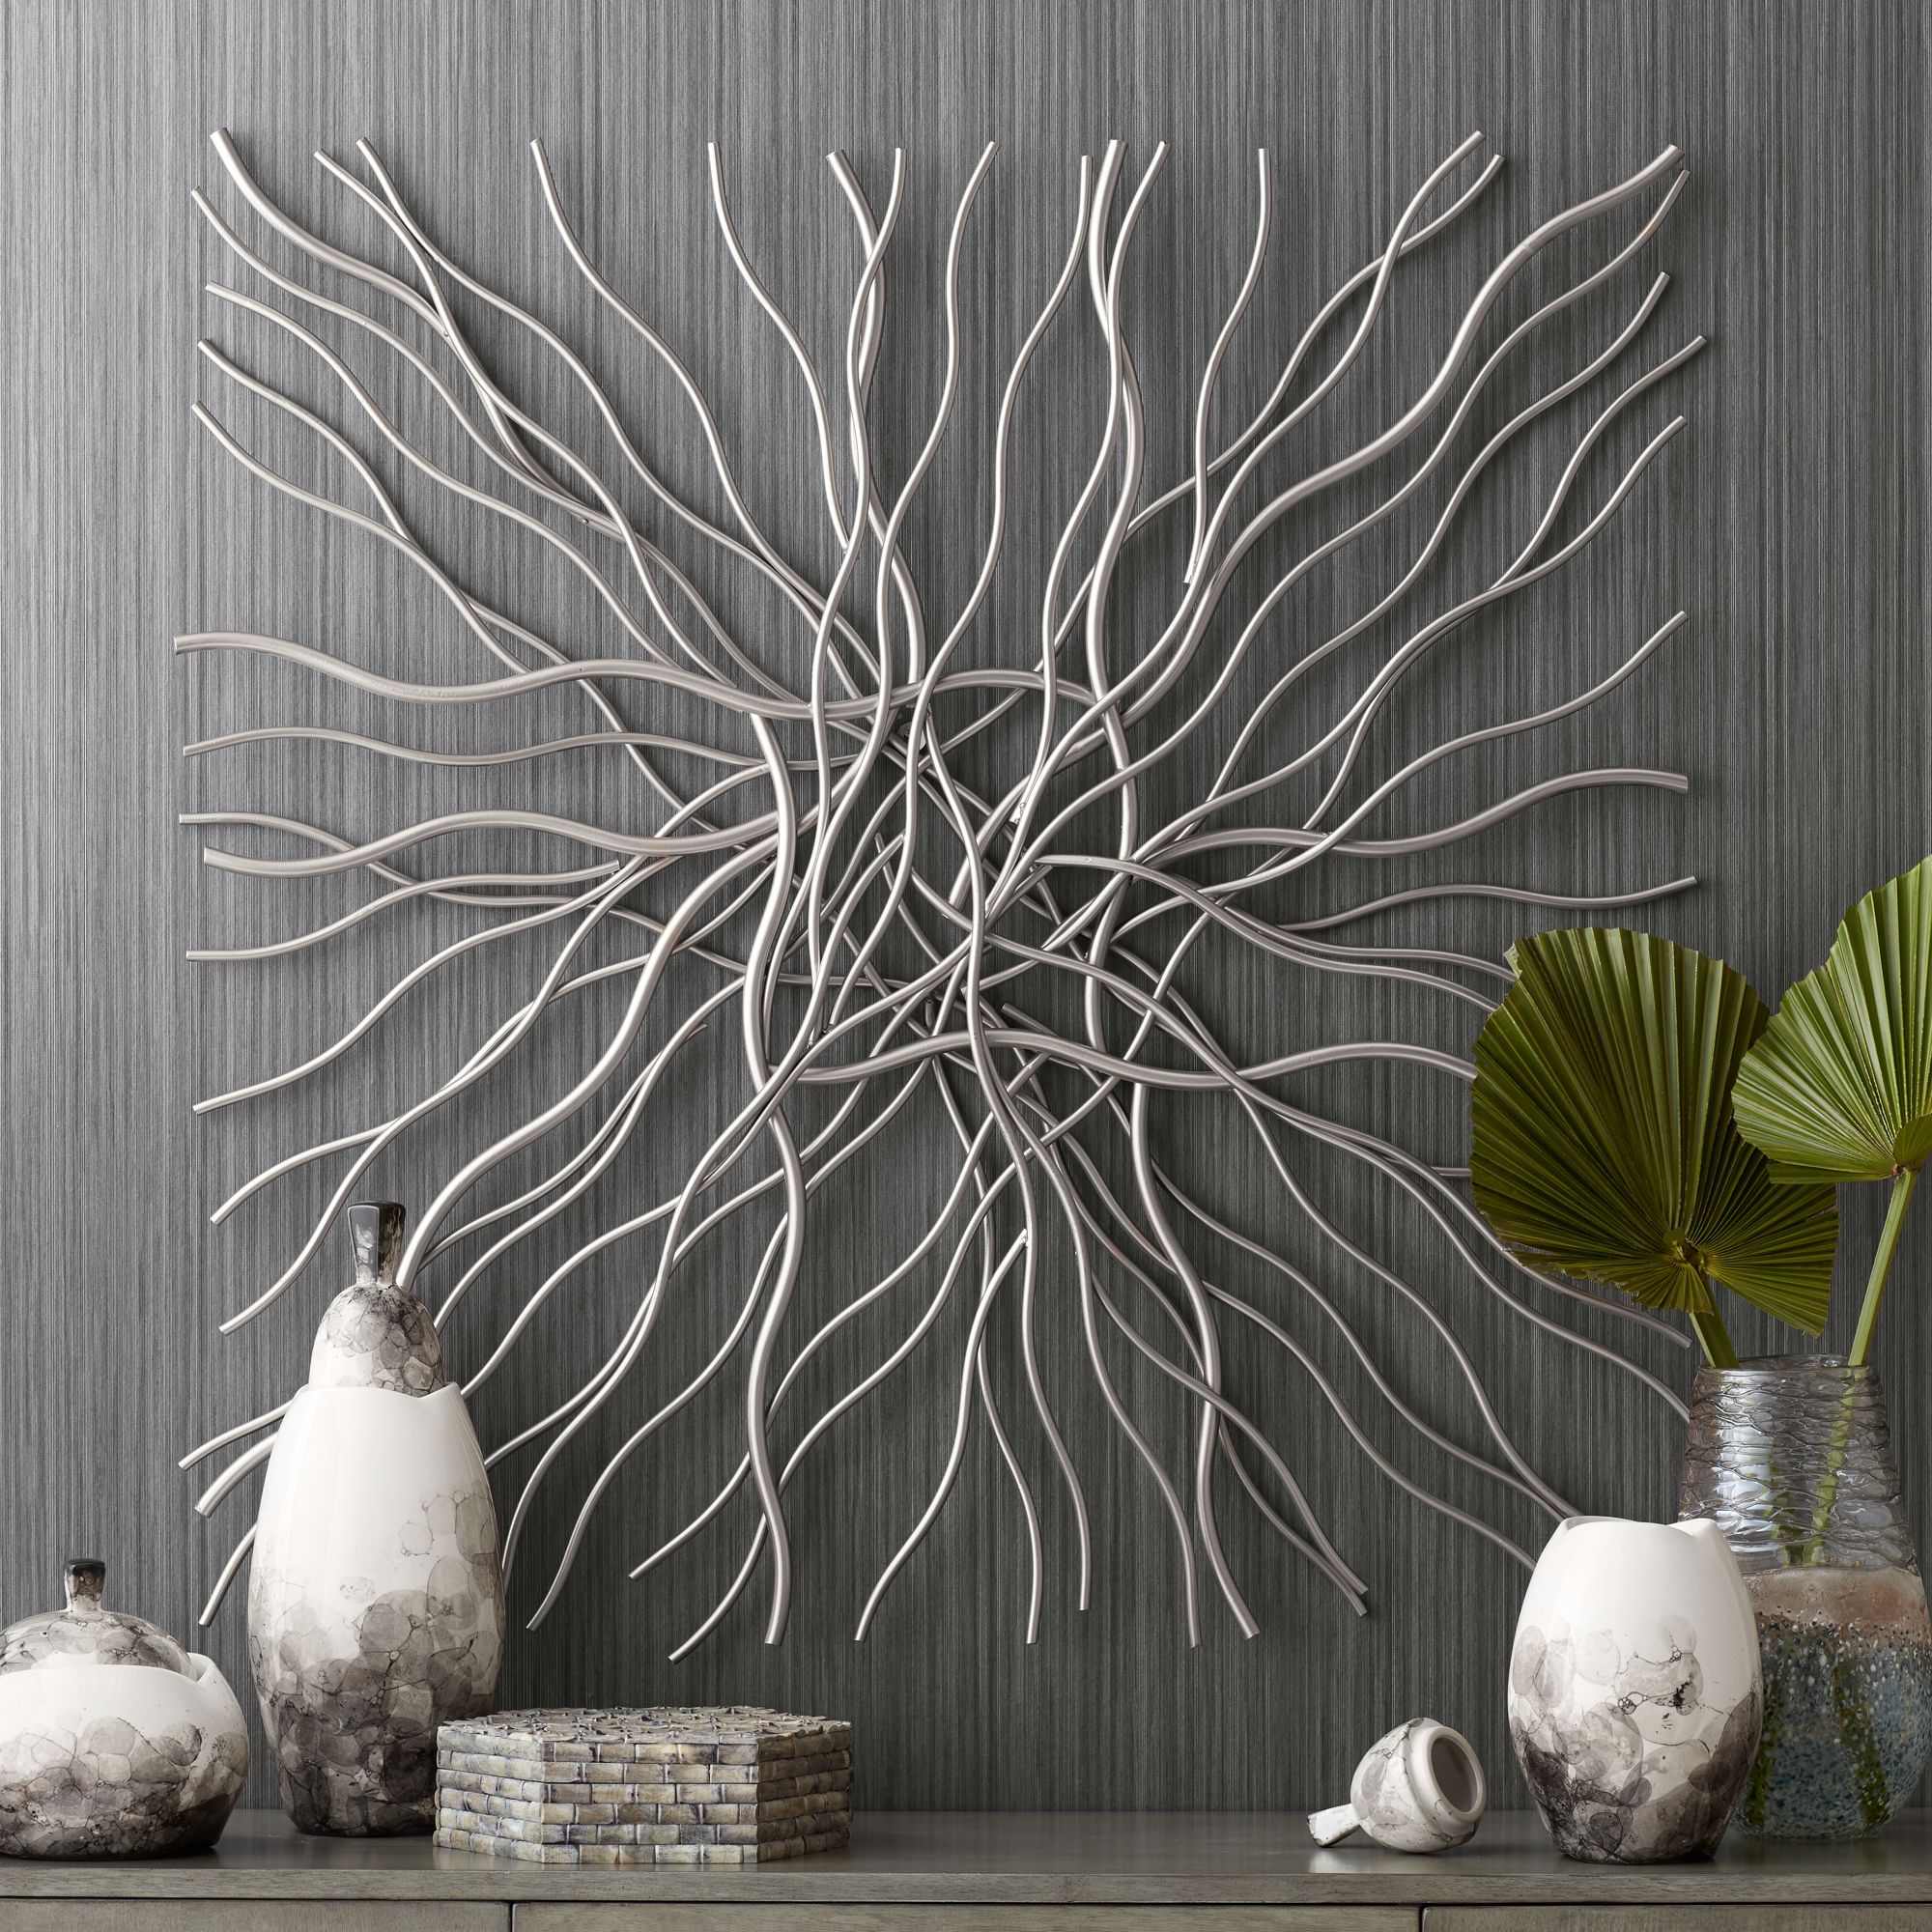 Abstract Leaves Wall Art Home Decoration Black Metal Wall Hanging Ornament Decor 